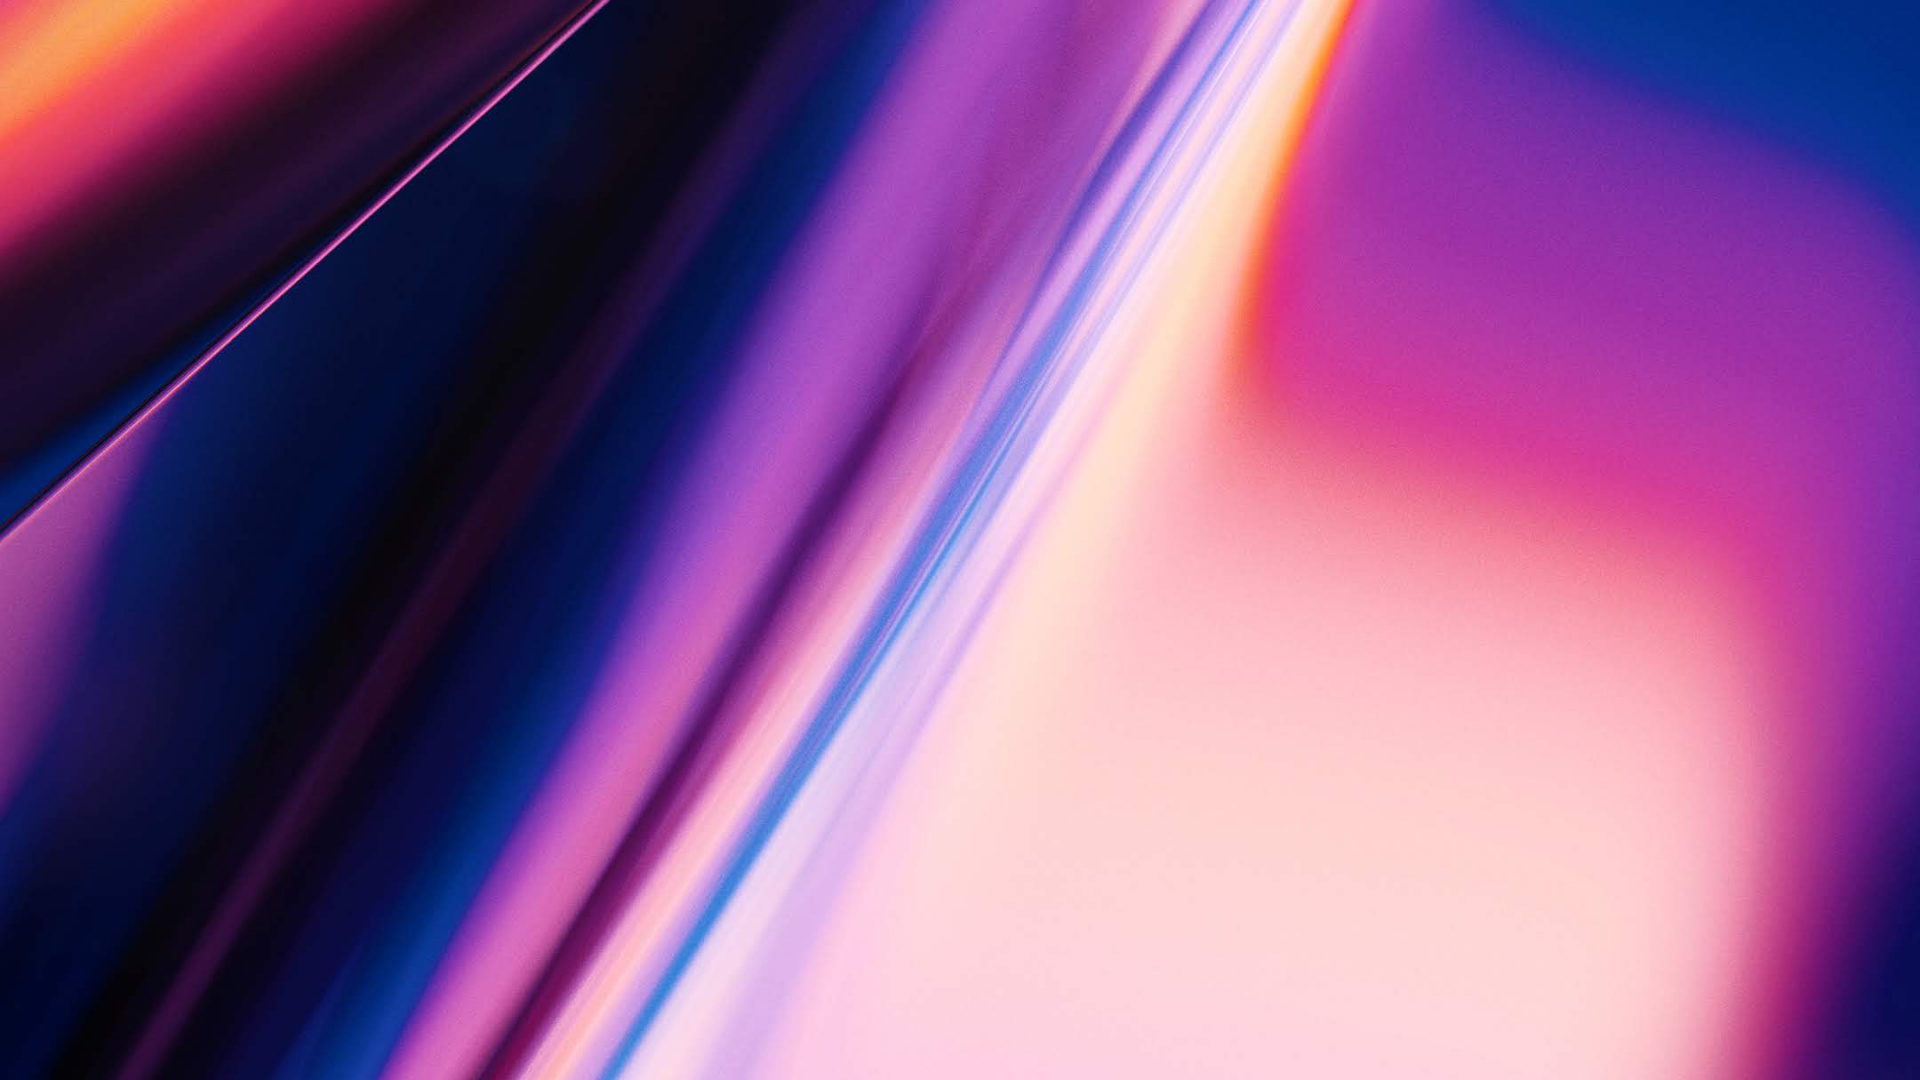 OnePlus 7 Pro, Oneplus 7t, Oneplus 8, Android, Colorfulness. Wallpaper in 1920x1080 Resolution